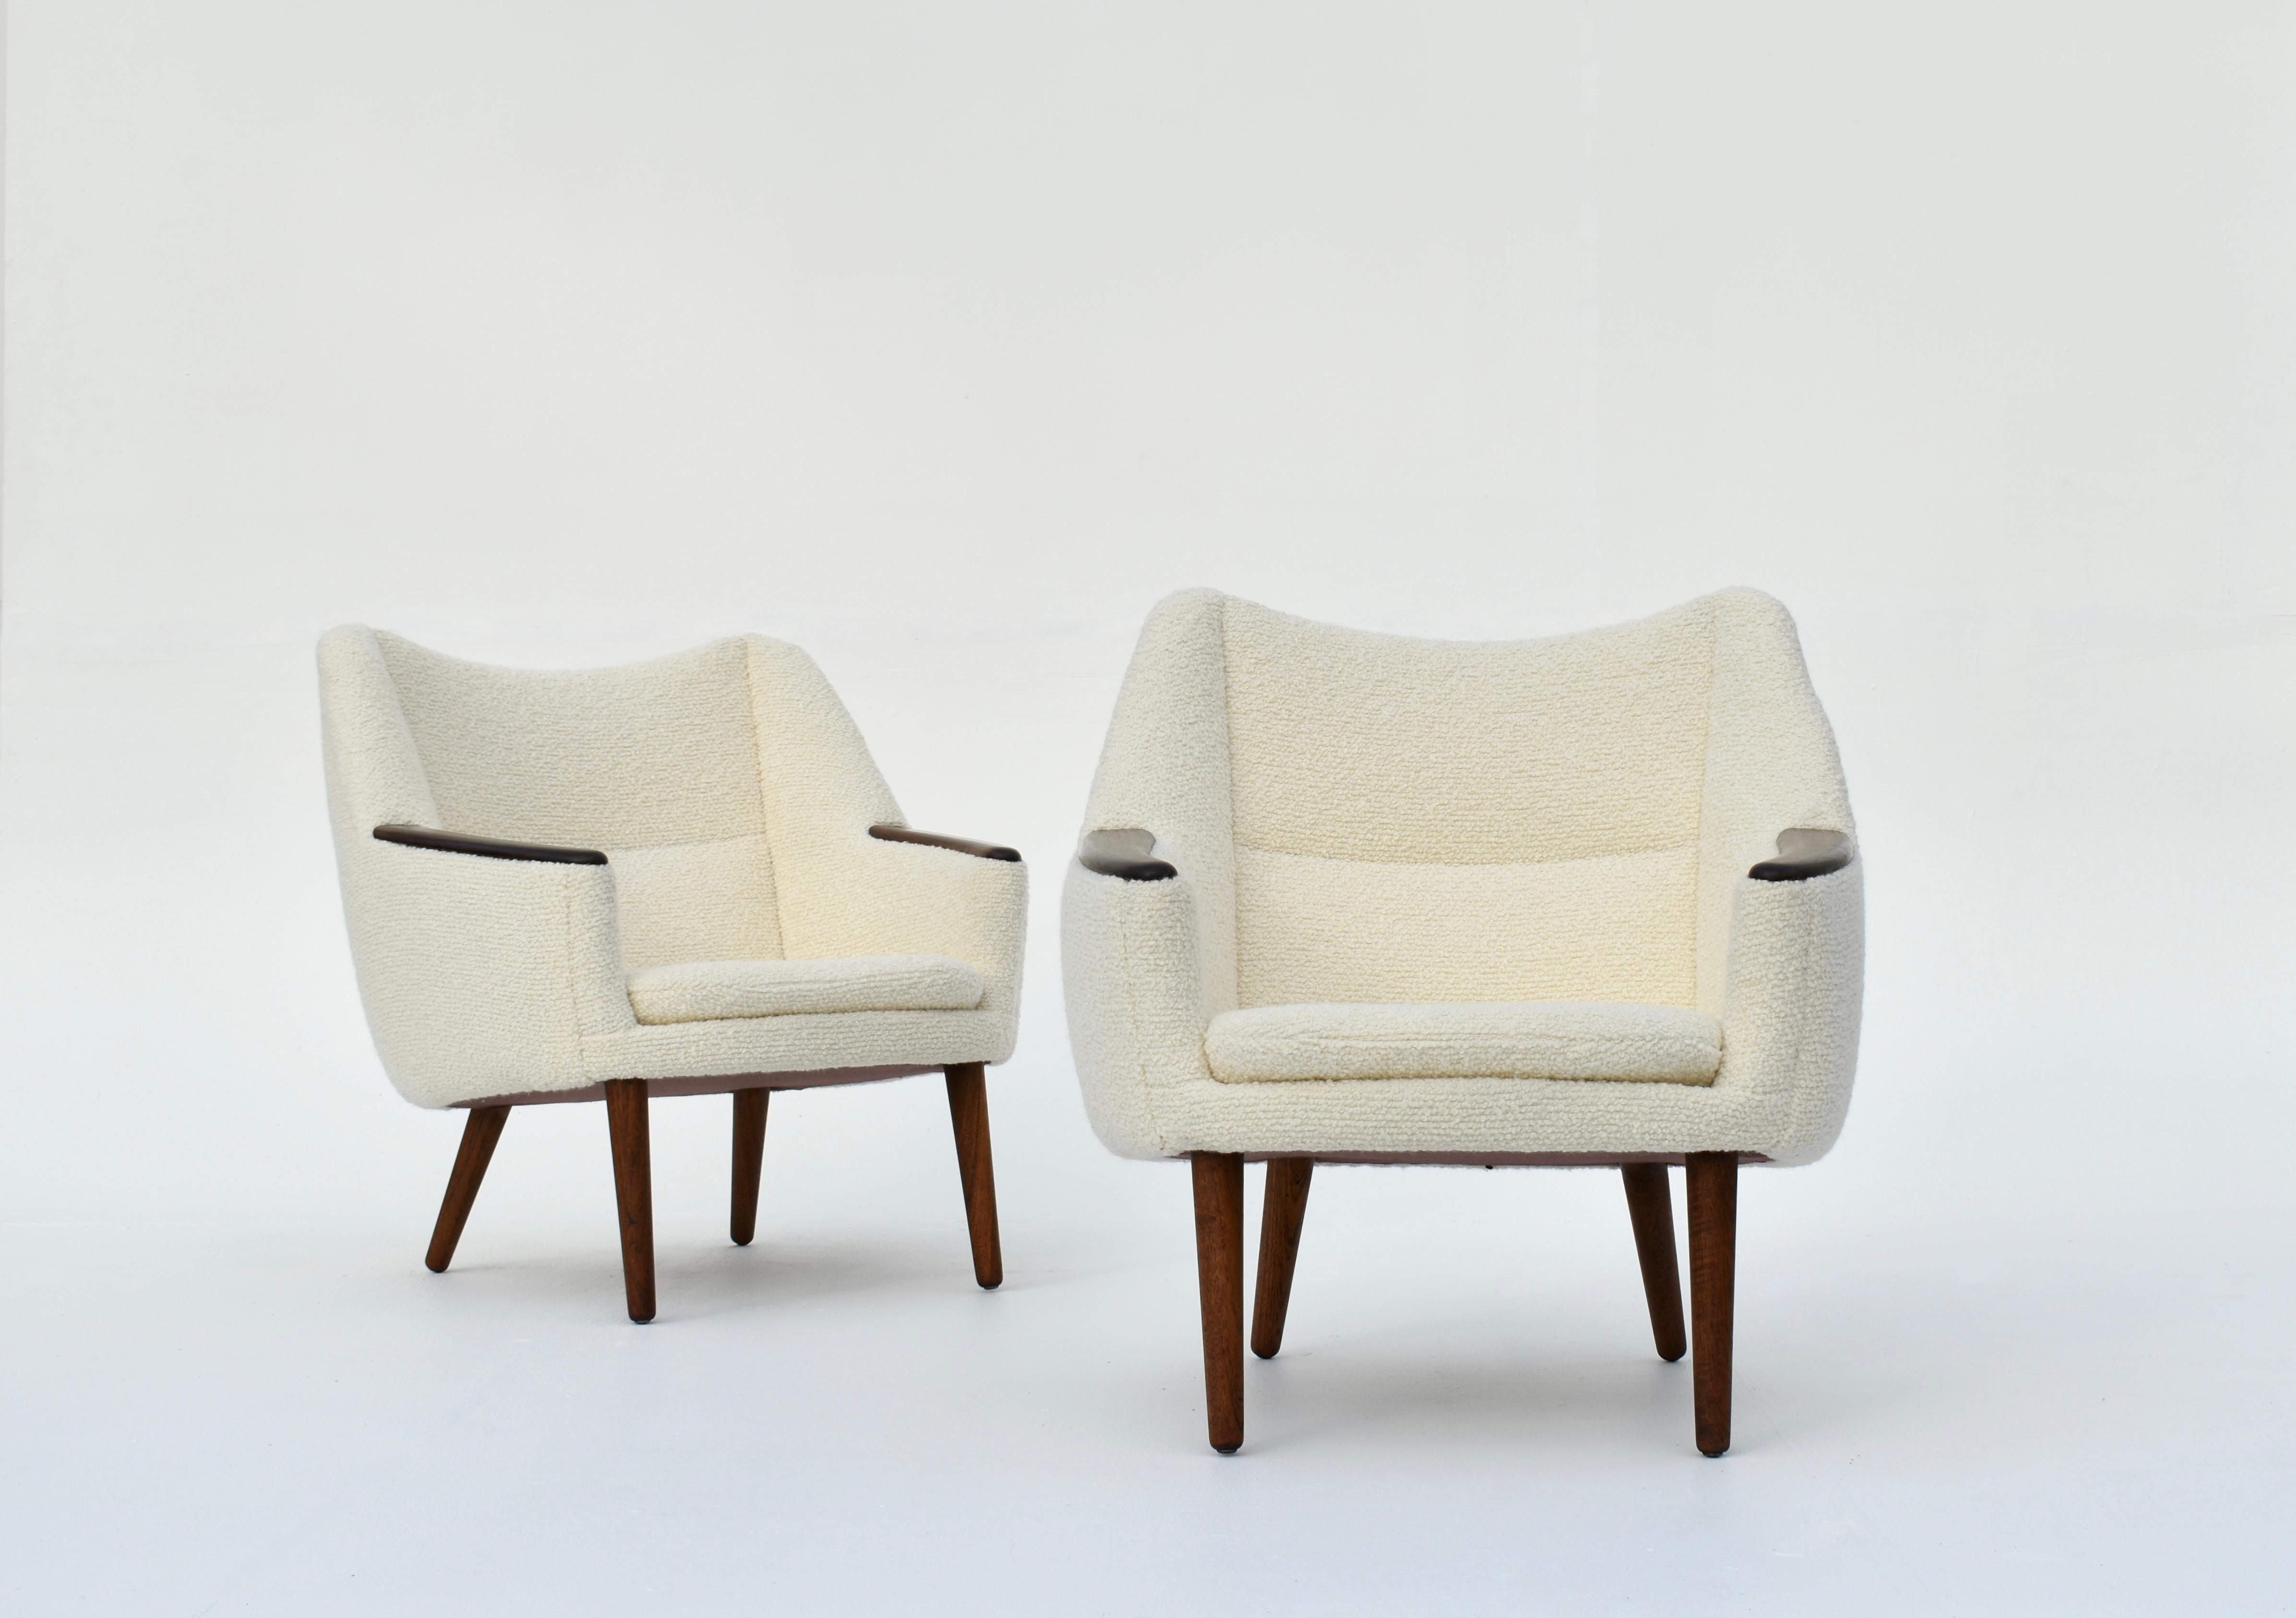 A very hard to find pair of Model 58 lounge chairs designed in the late 50s by Kurt Østervig for Rolschau Mobler, Denmark.

An incredibly handsome design with wonderful proportions.

These chairs feature Solid Brazilian rosewood armrests and